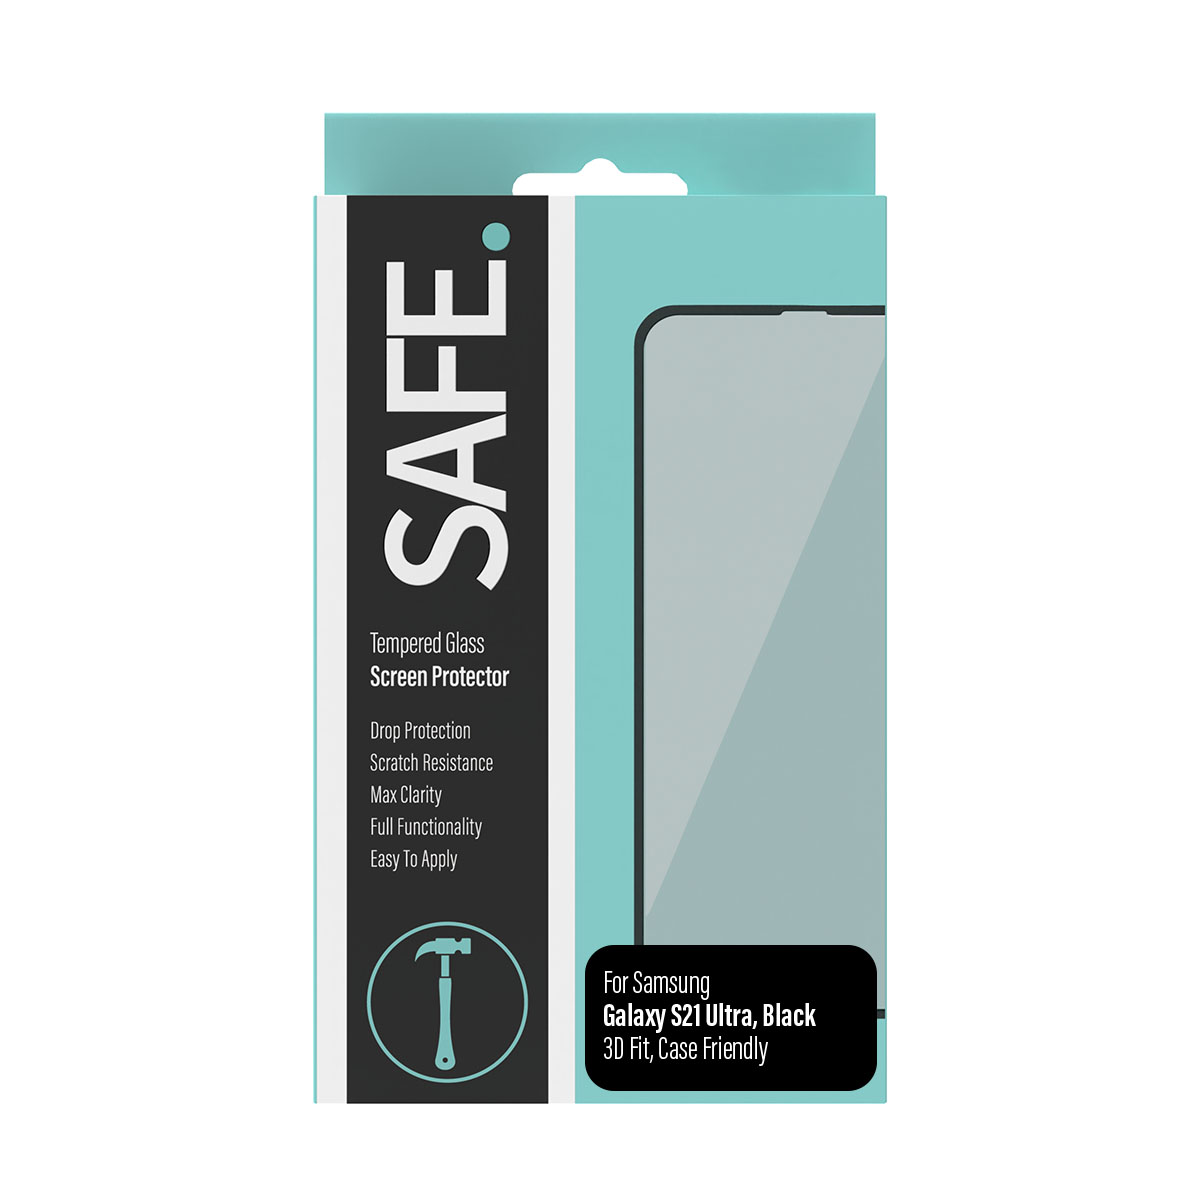 SAFE Samsung Galaxy S21 Ultra - Screen Protector -  Drop Protective, Scratch Resistance, Max Clarity